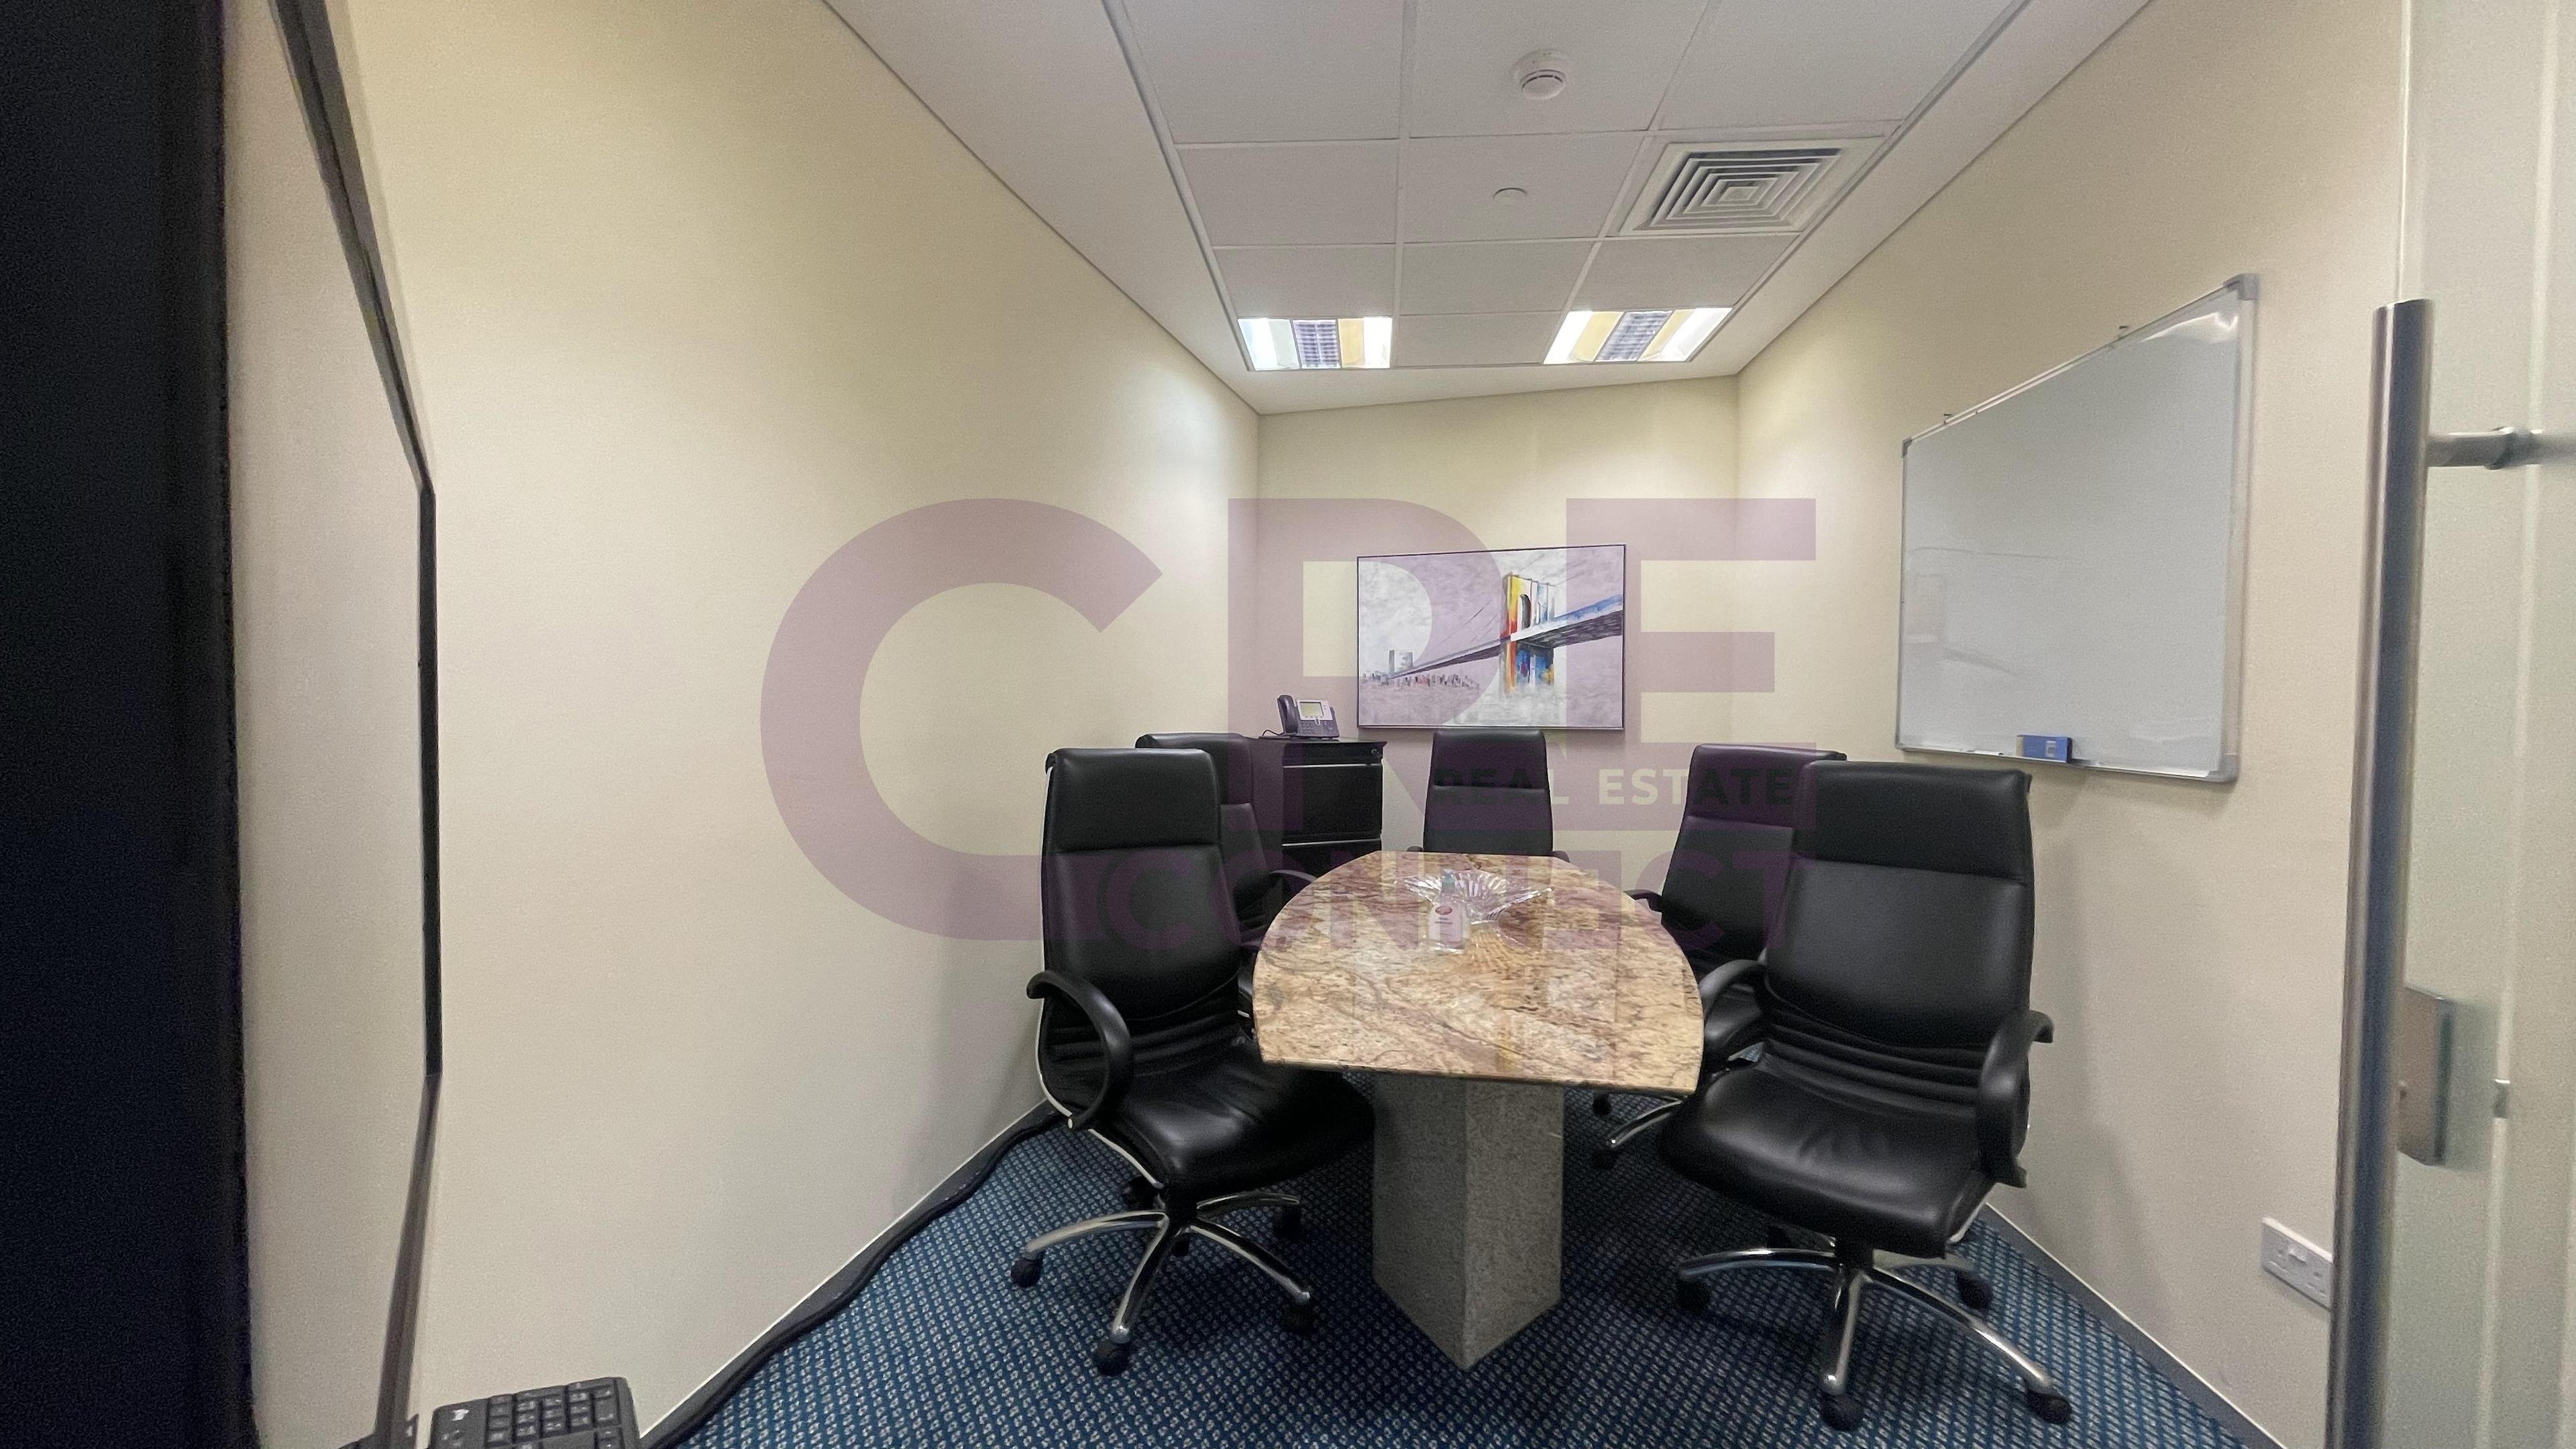 2 bath Office Space for rent in Etihad Tower 3, Etihad Towers, Corniche Road, Abu Dhabi for price AED 66000 yearly 